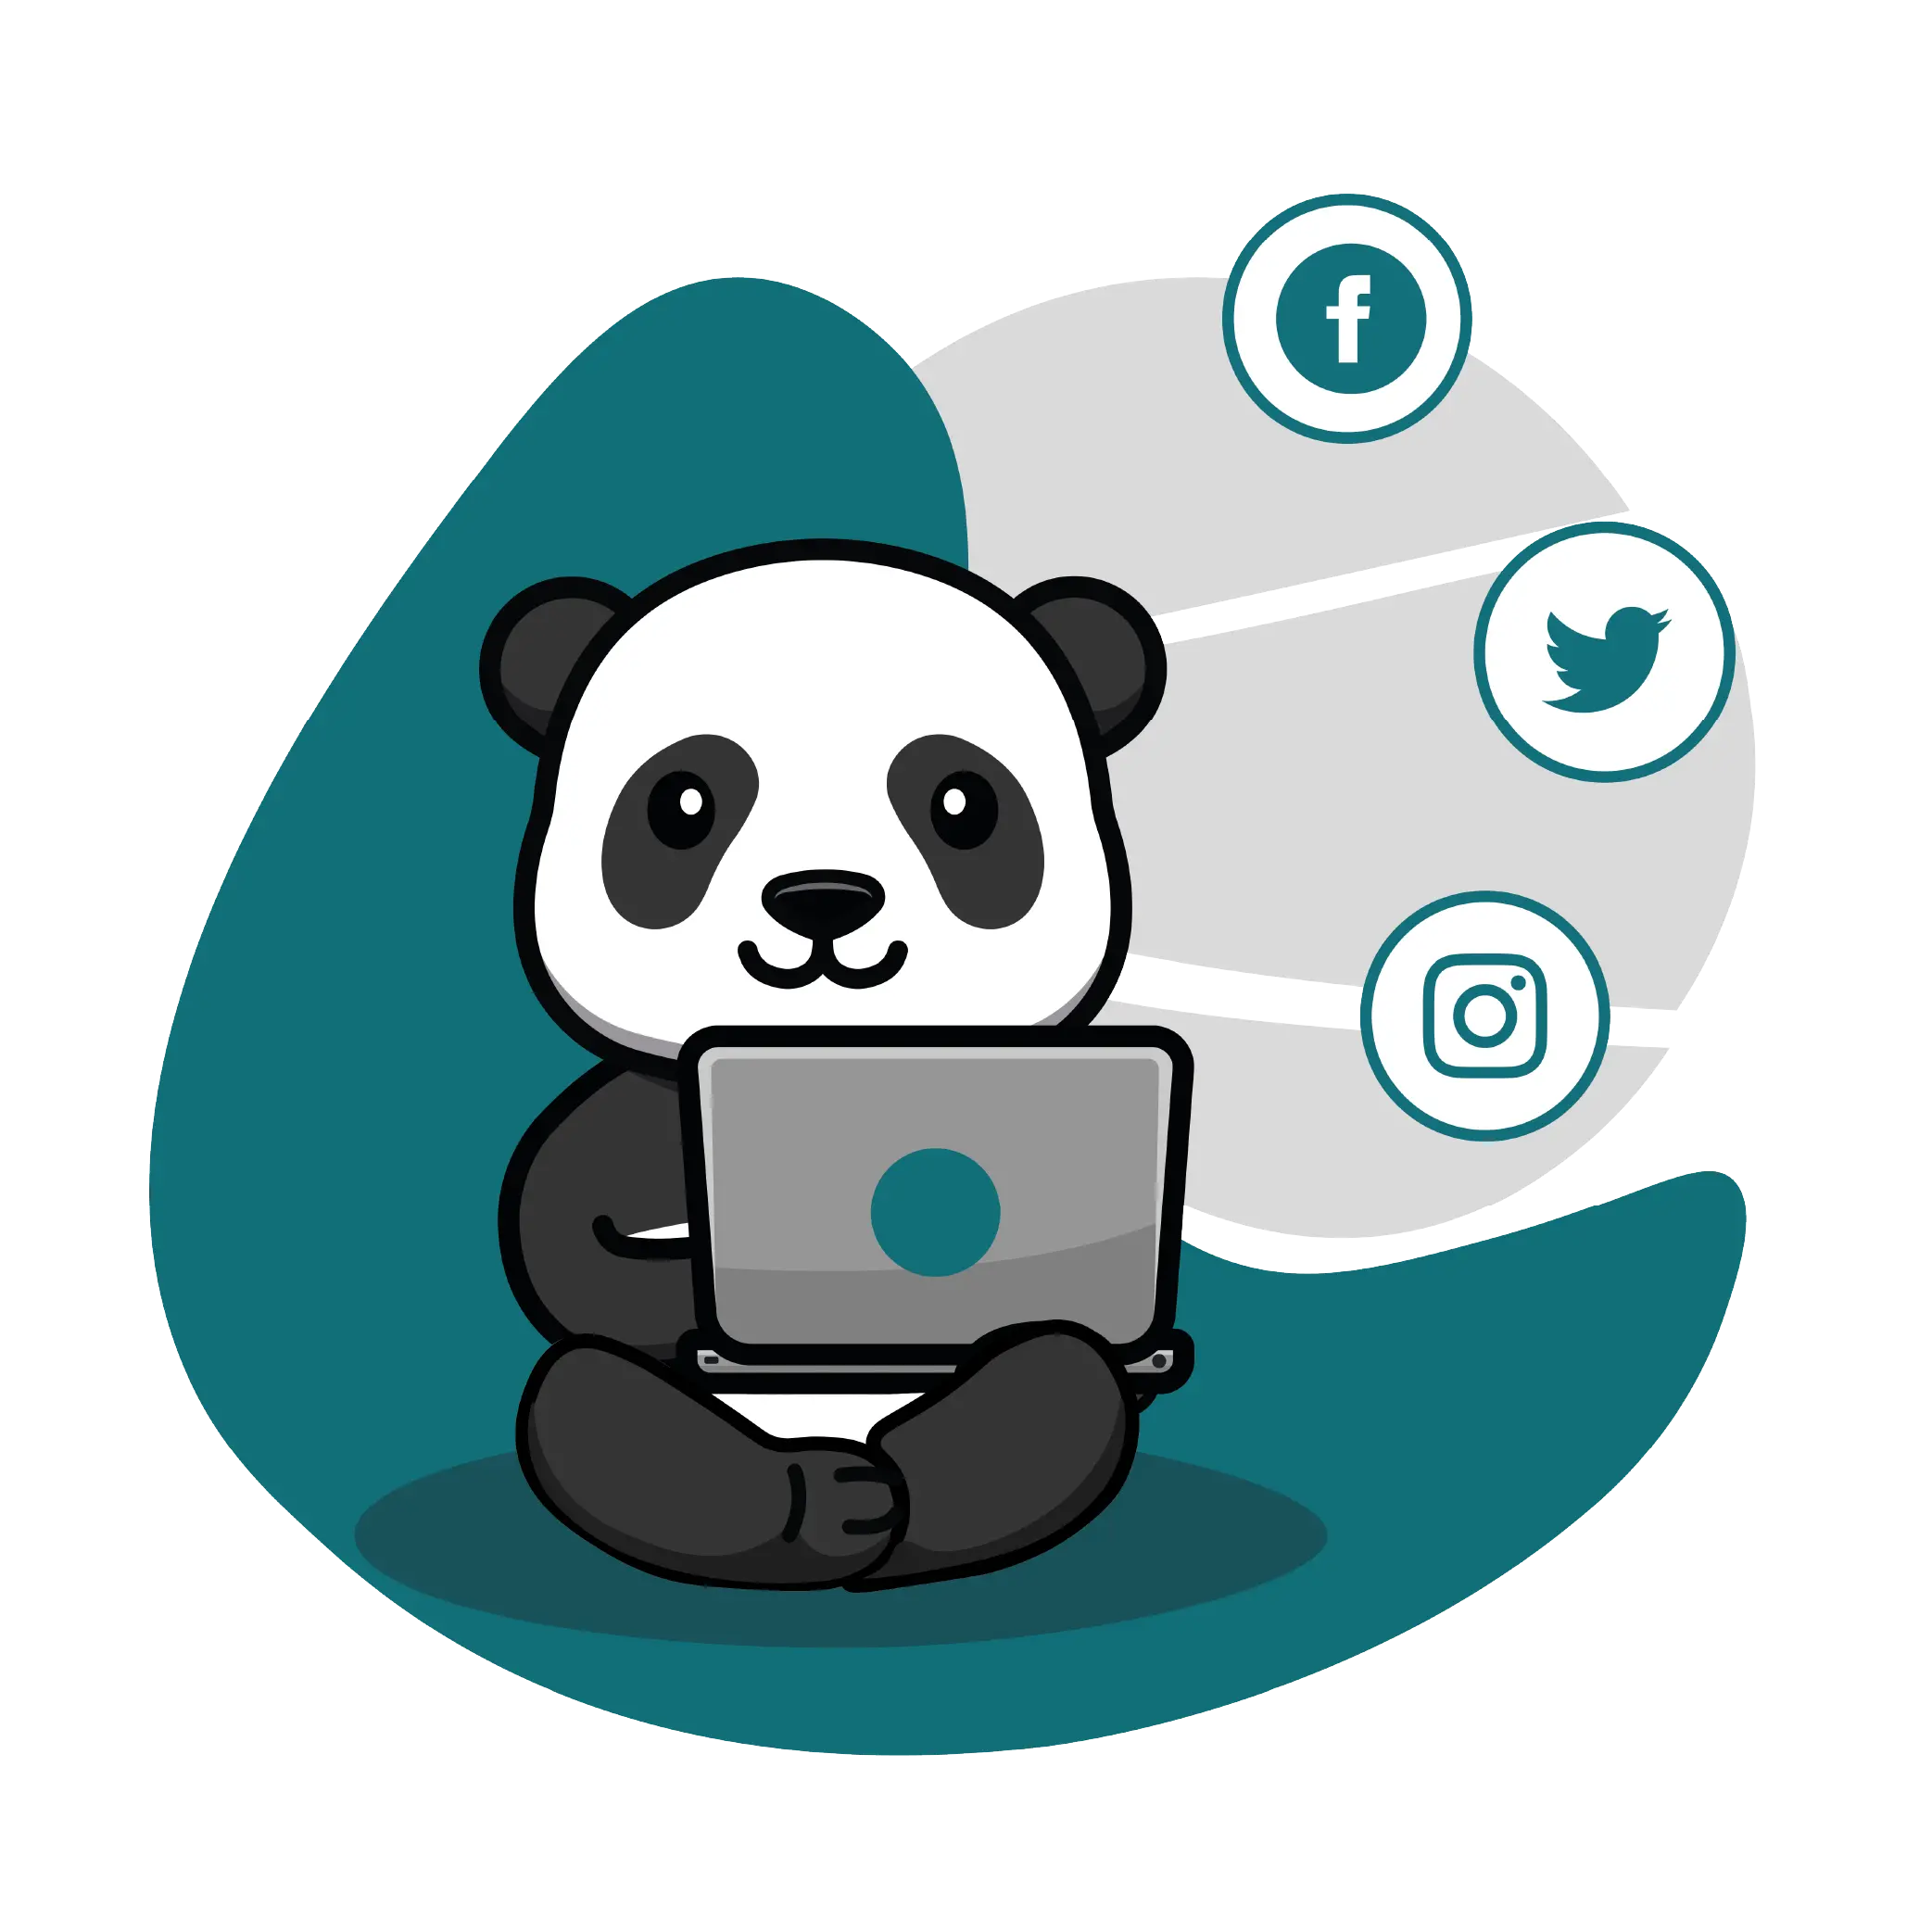 Panda in action on social networks for paid search